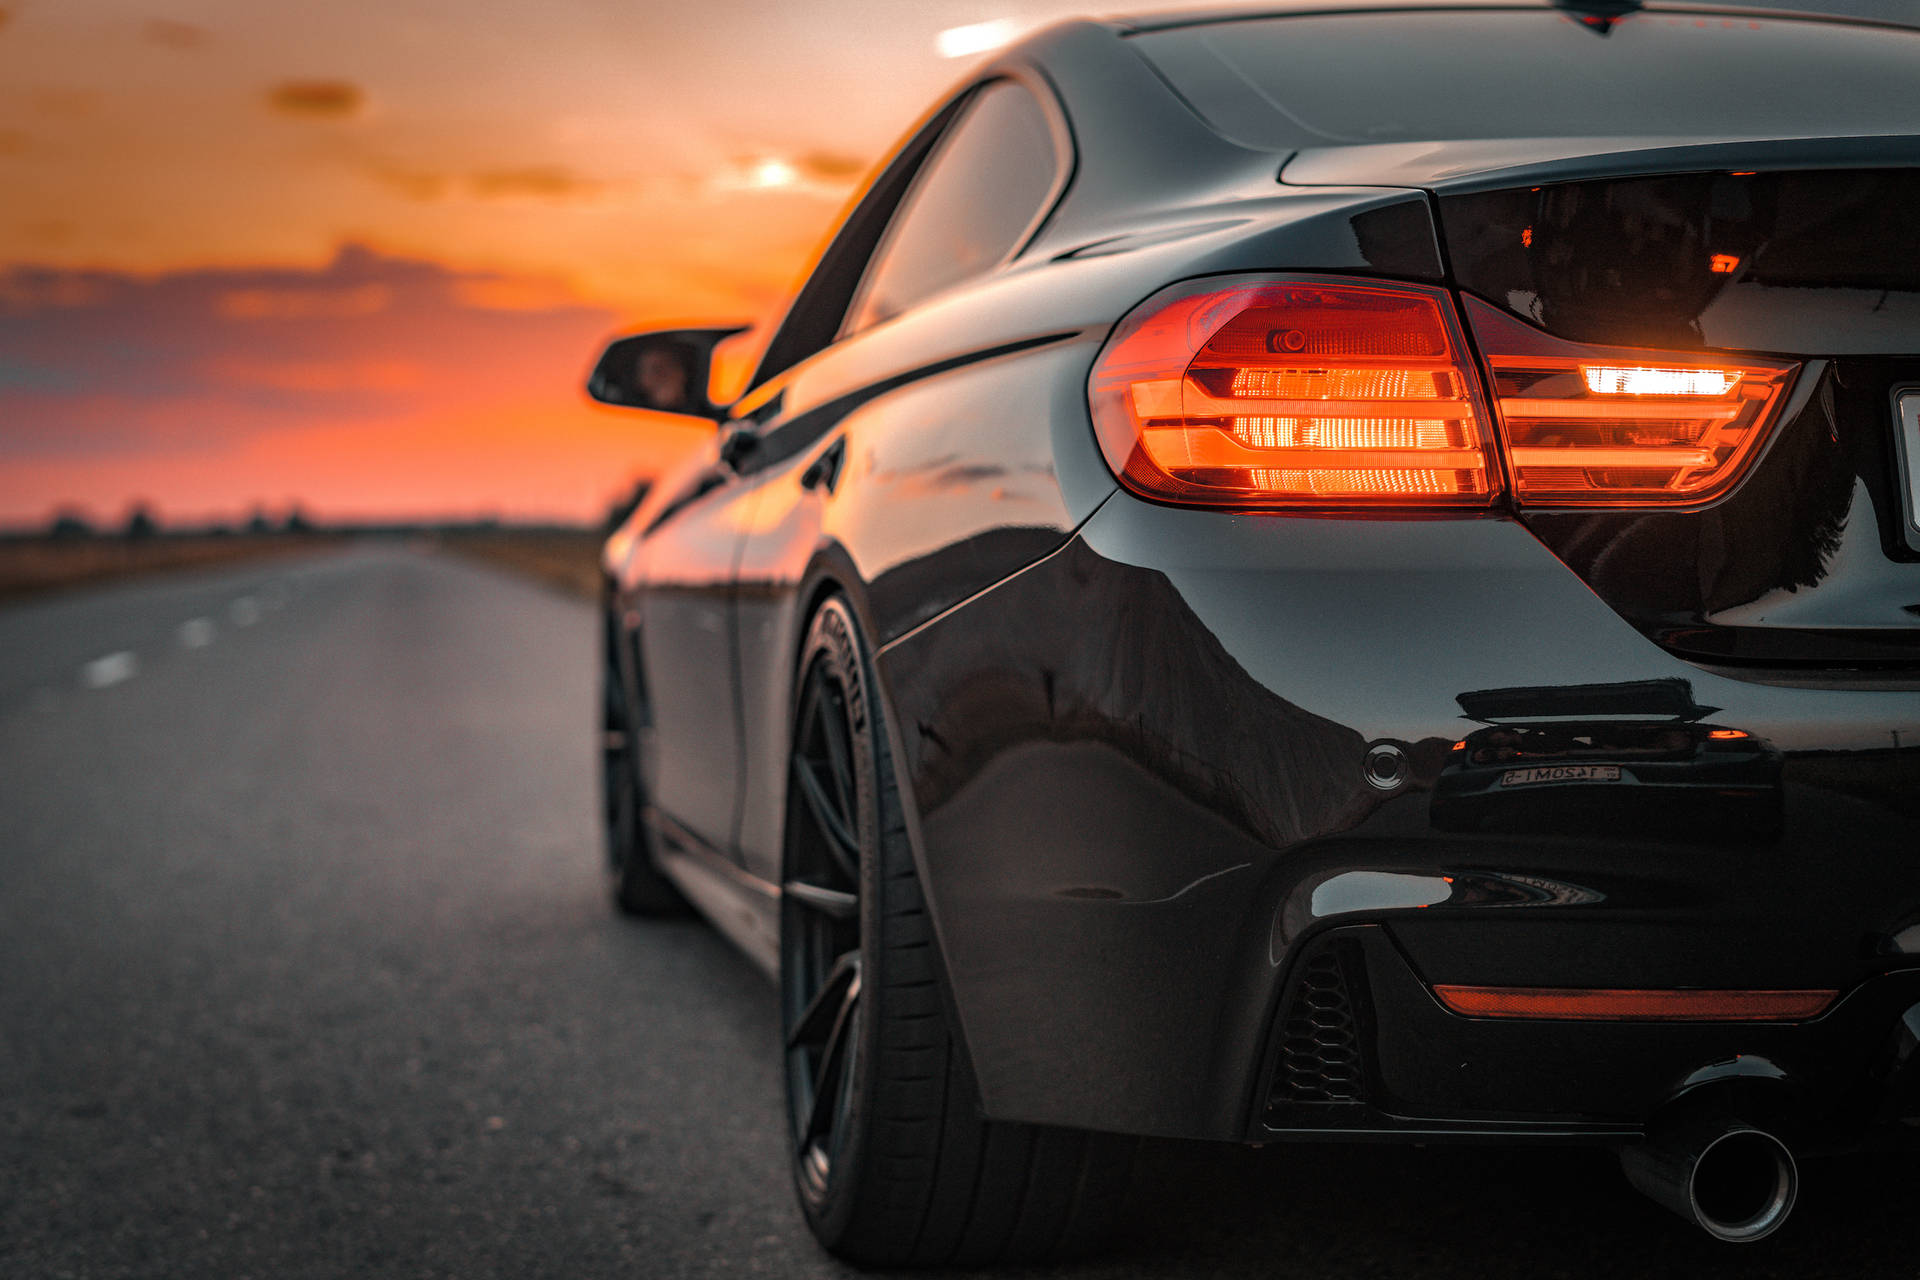 BMW M In A Road At Sunset Wallpaper